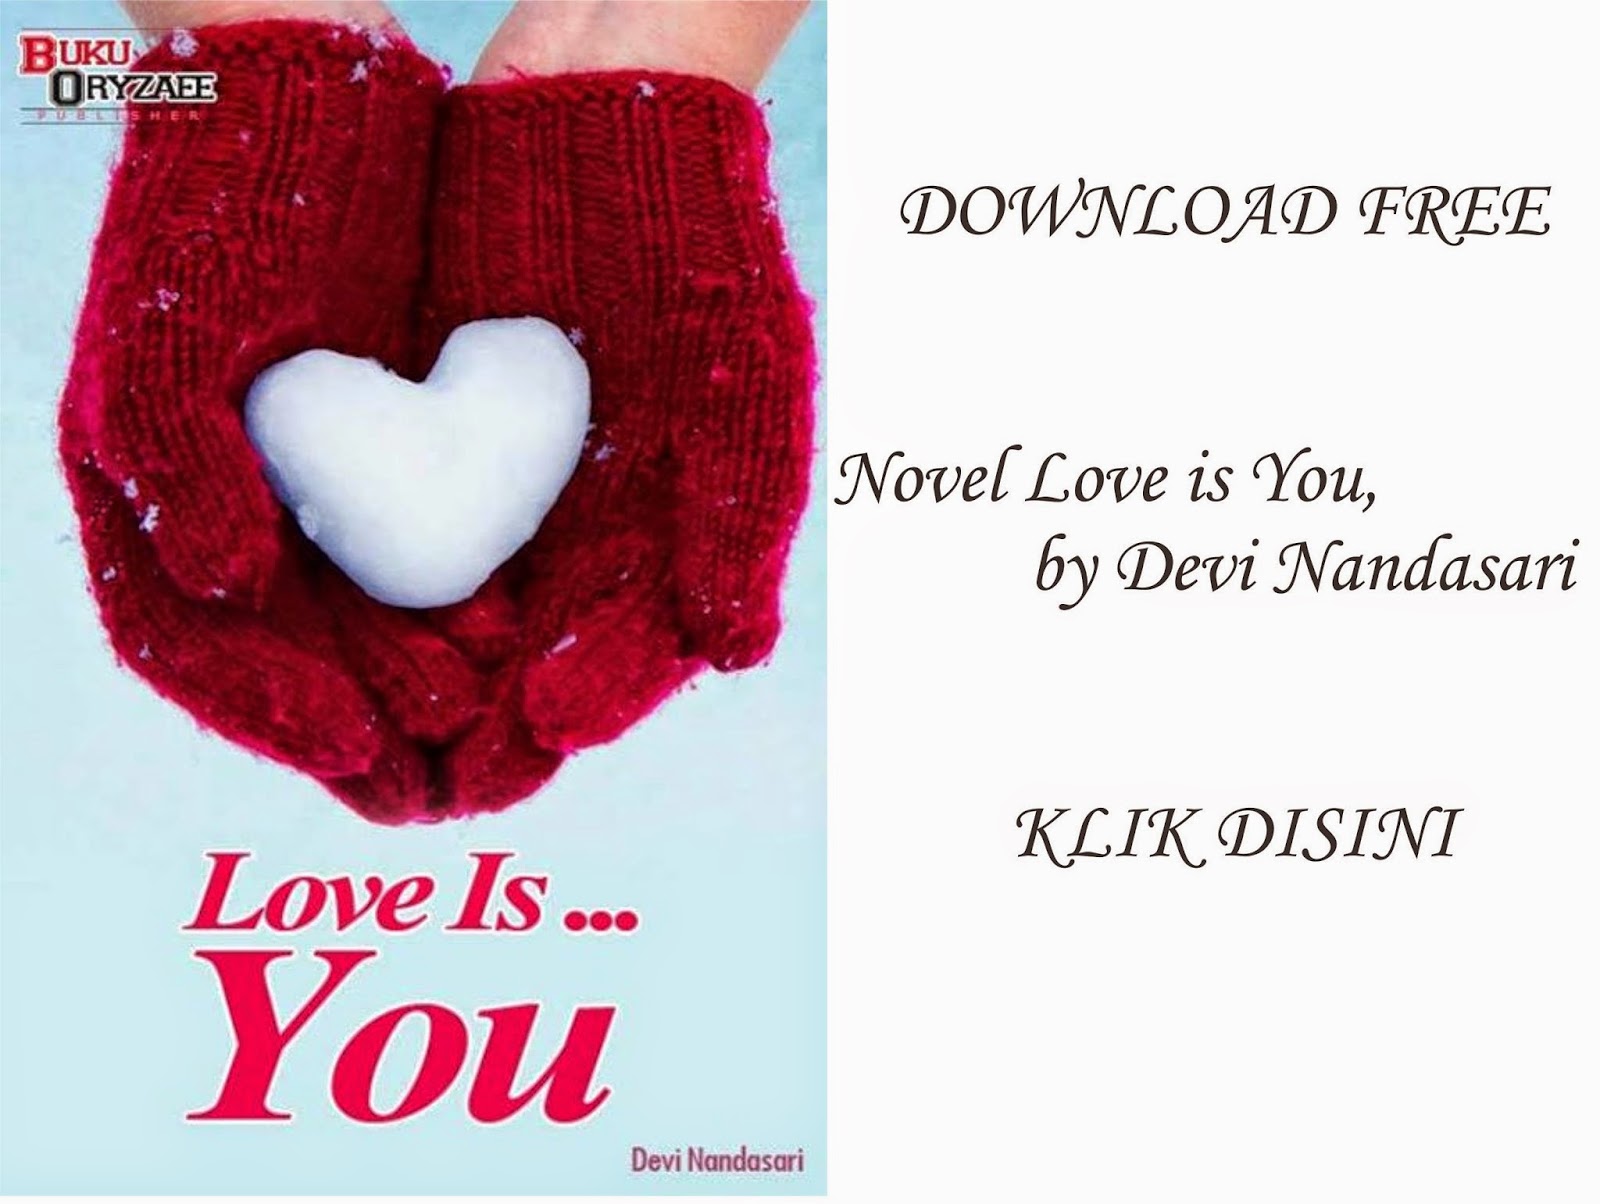 DOWNLOAD NOVEL LOVE IS YOU FREE